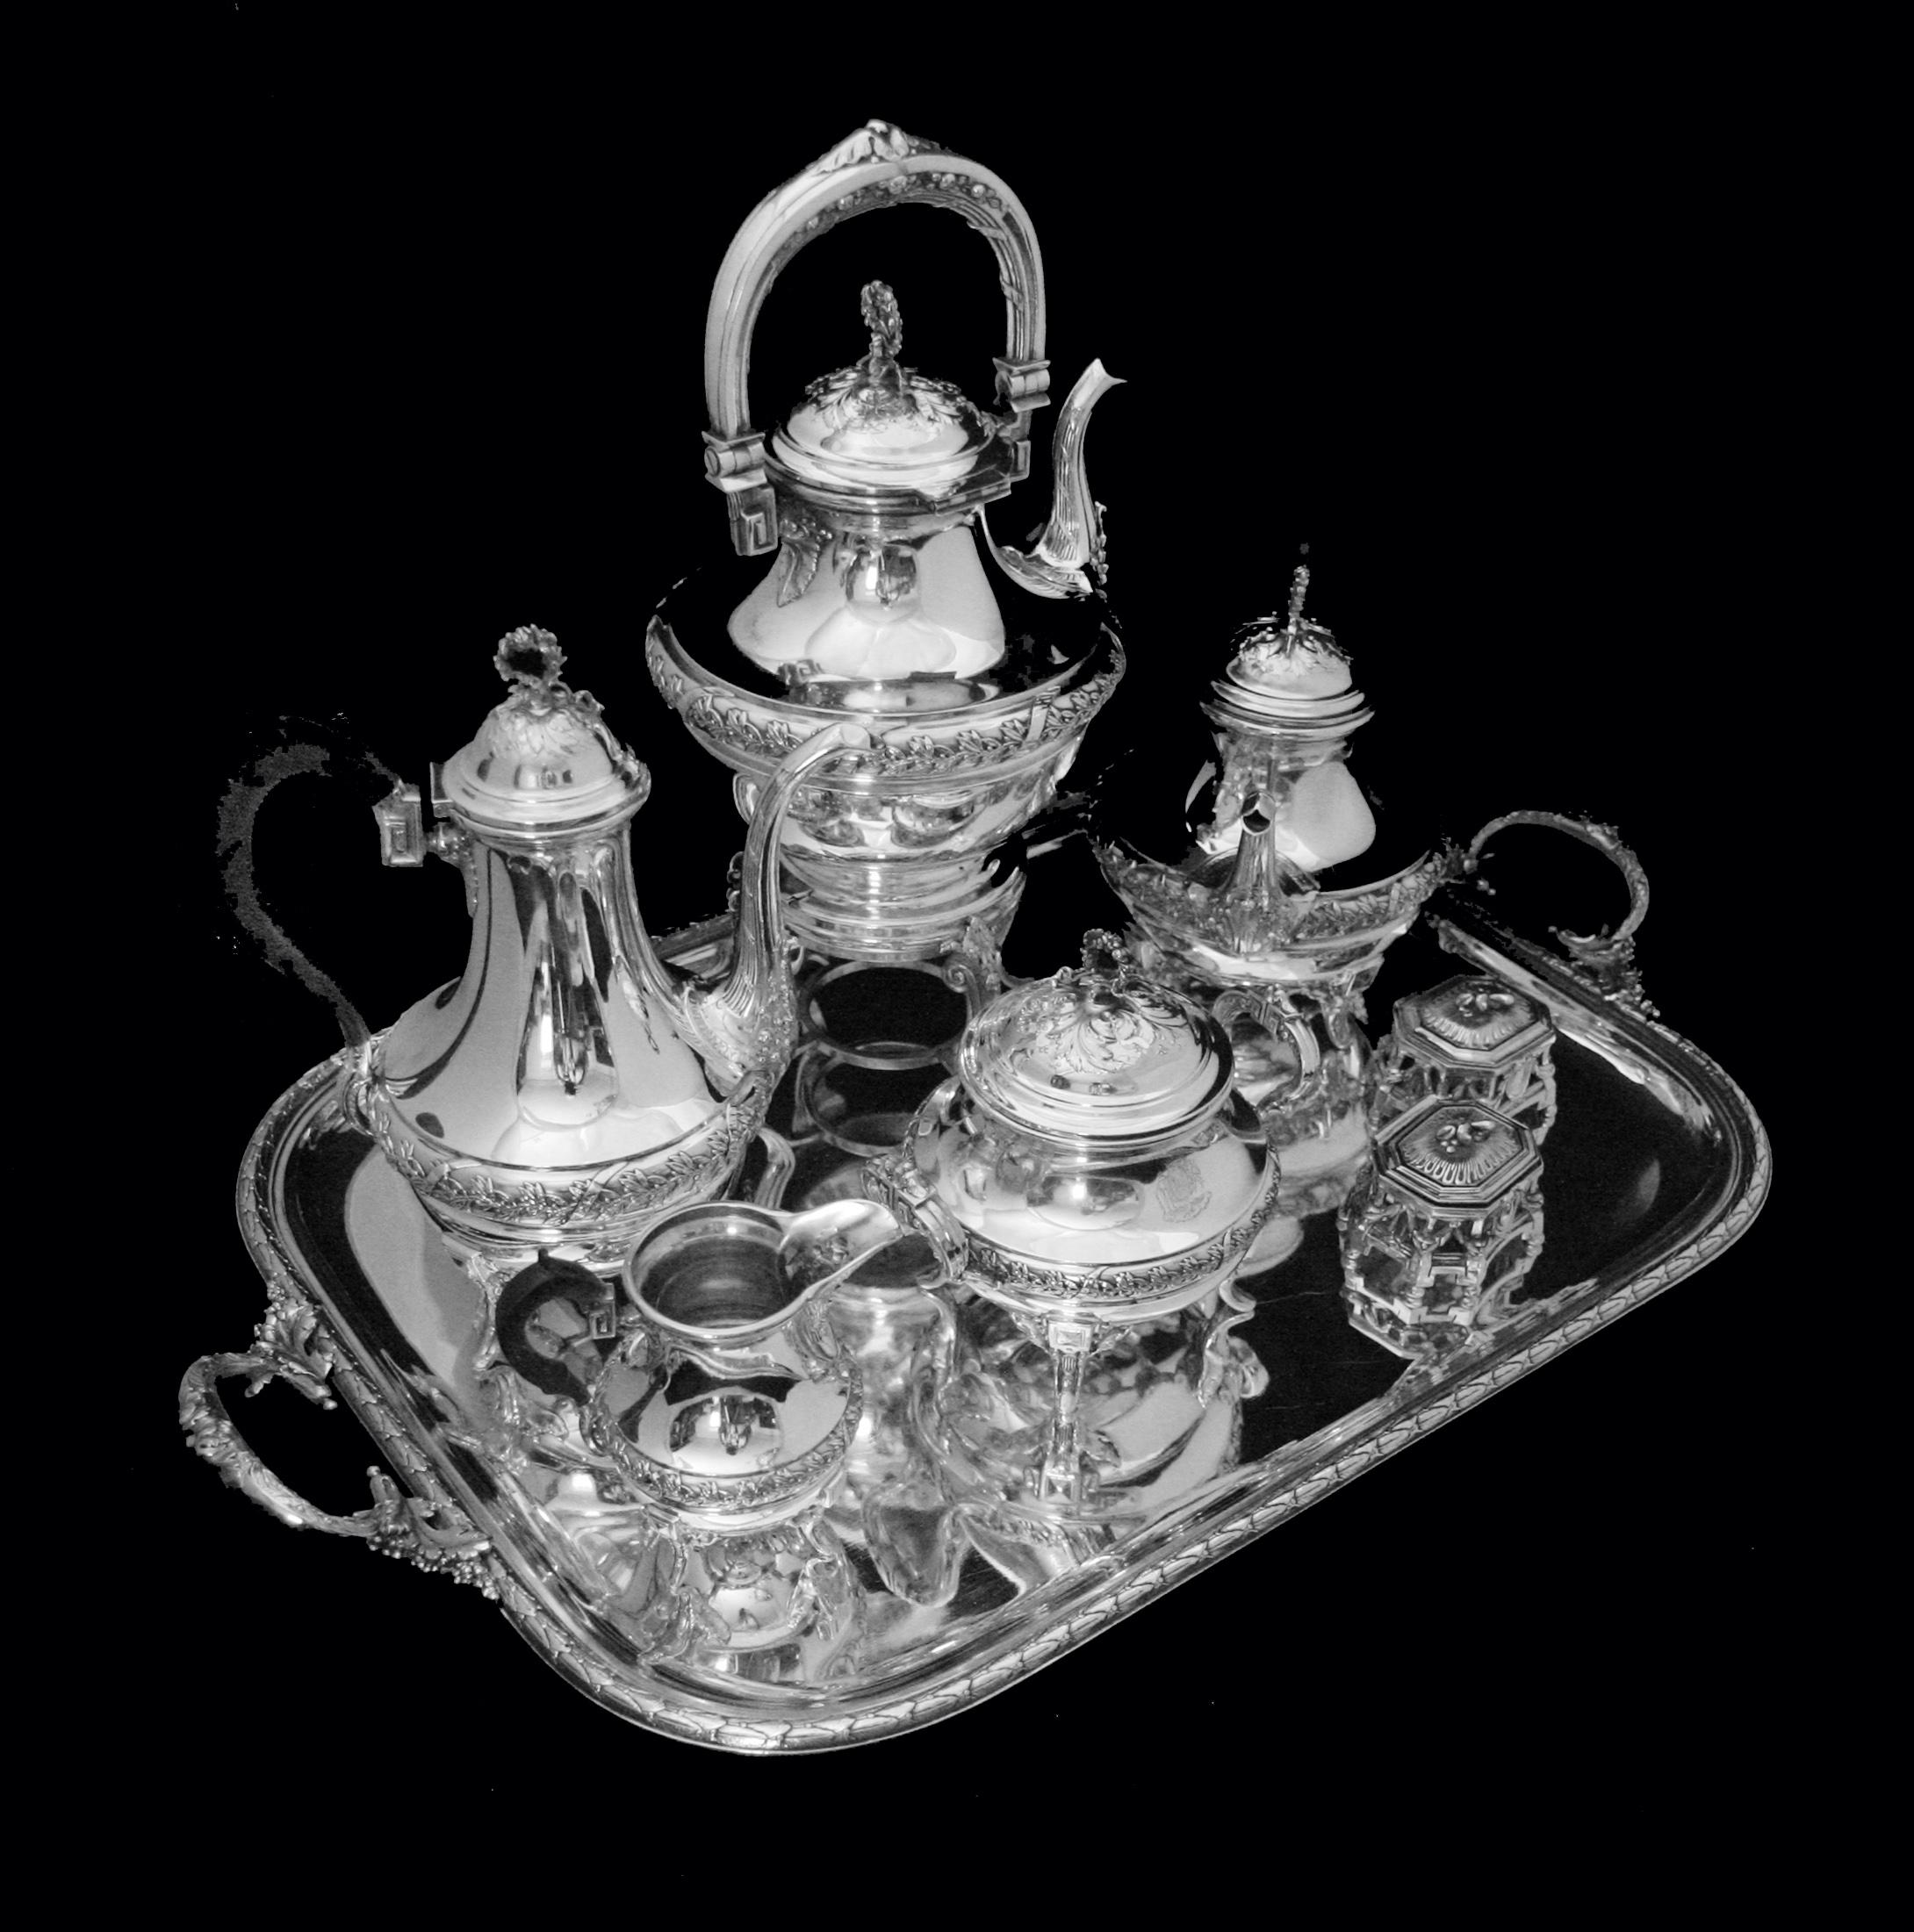 Direct from Paris, A Superb 8 piece 19th Century Louis XVI Sterling Silver Tea Set by the one of France's Premier Silversmiths 